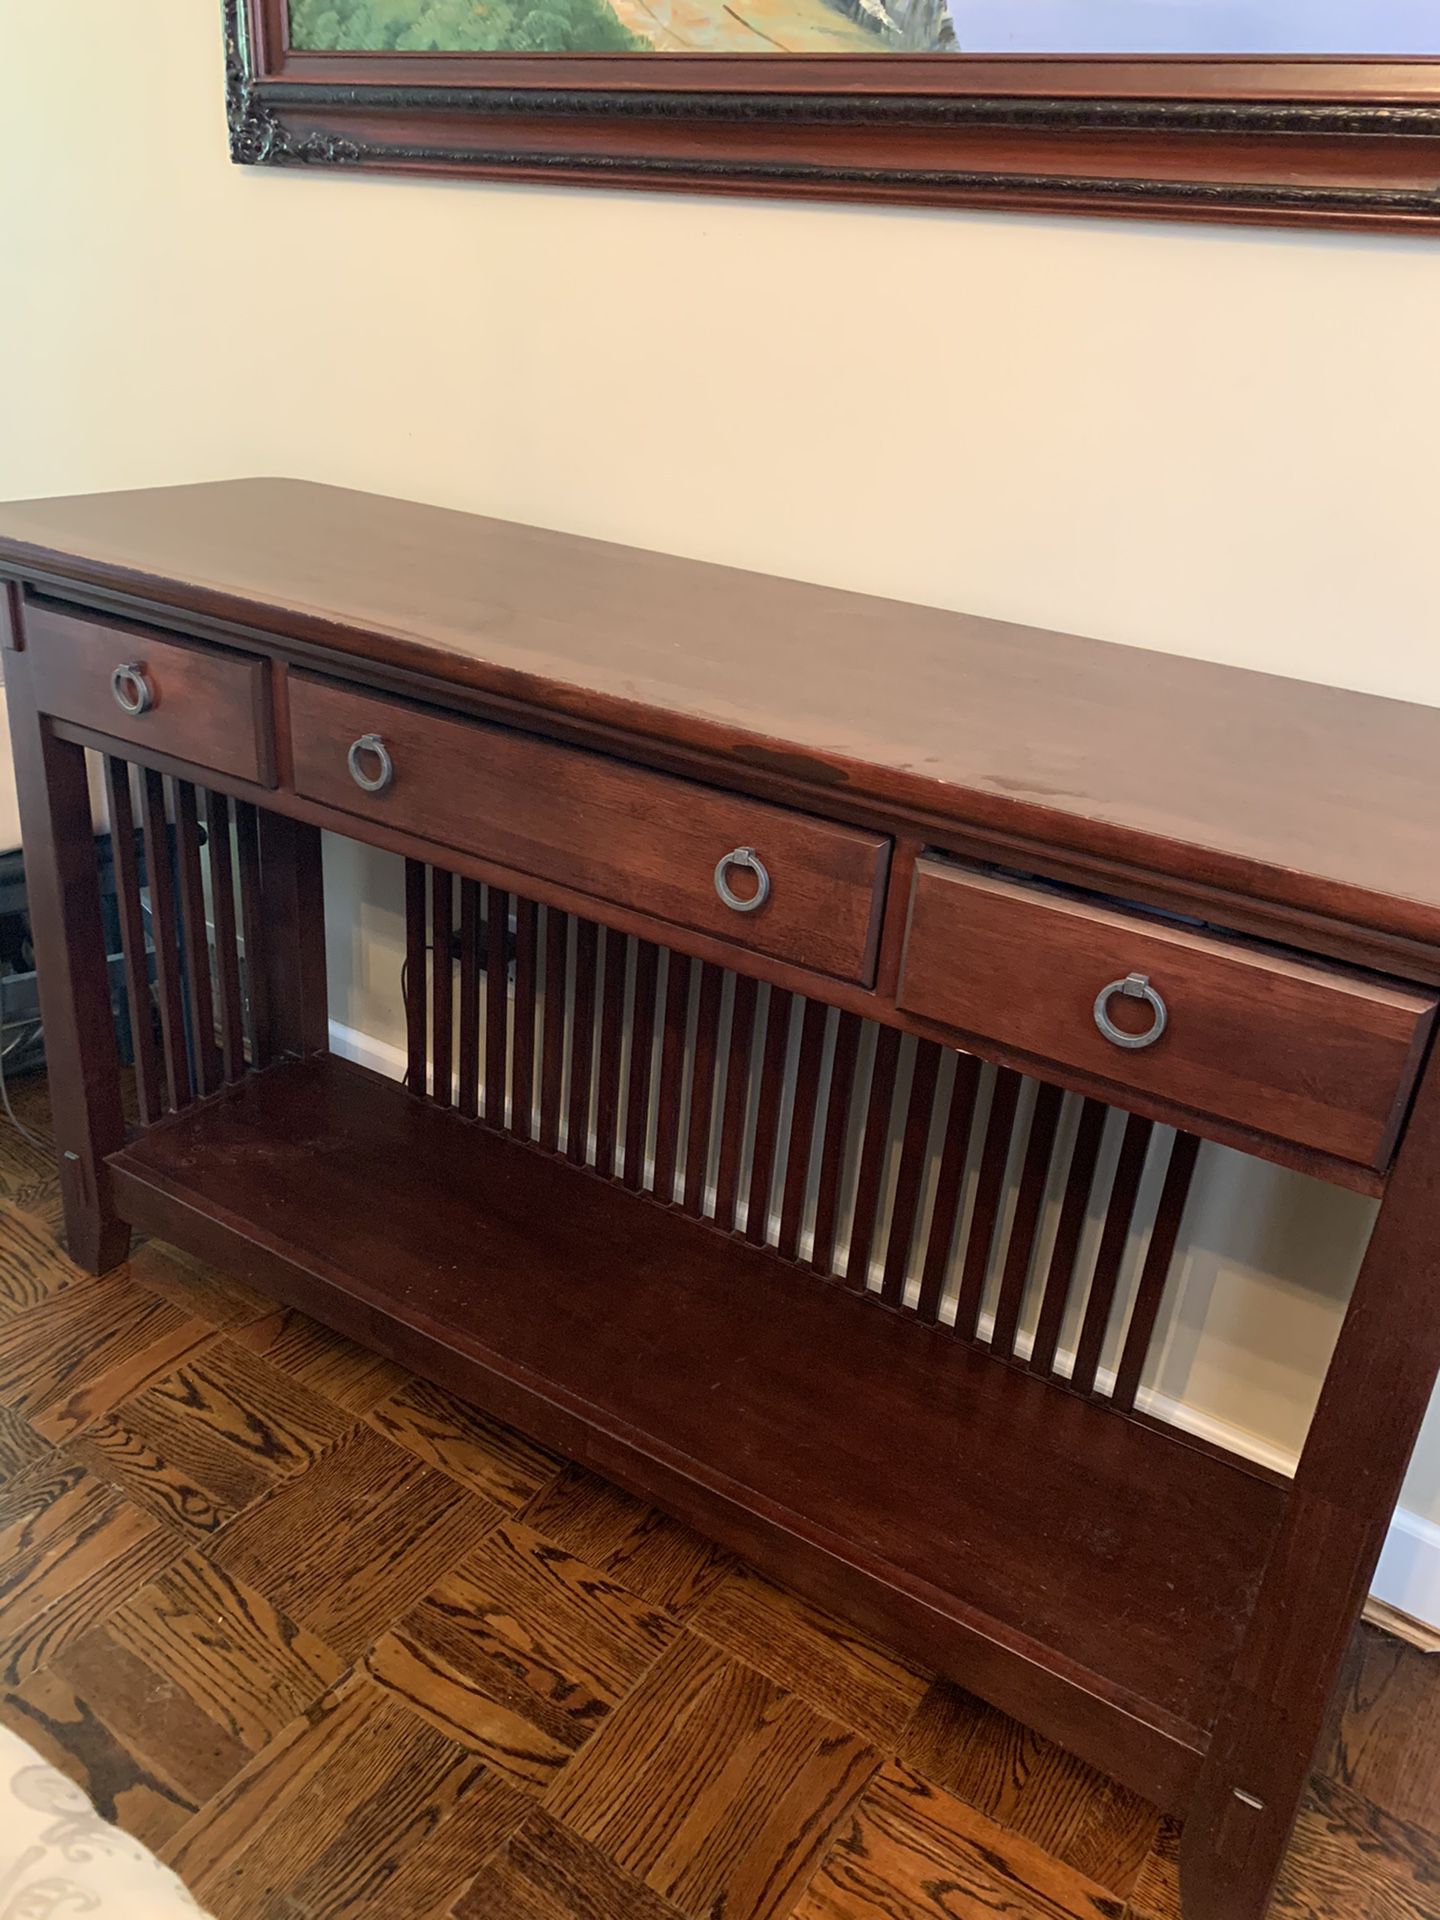 Console/Entry table with drawers